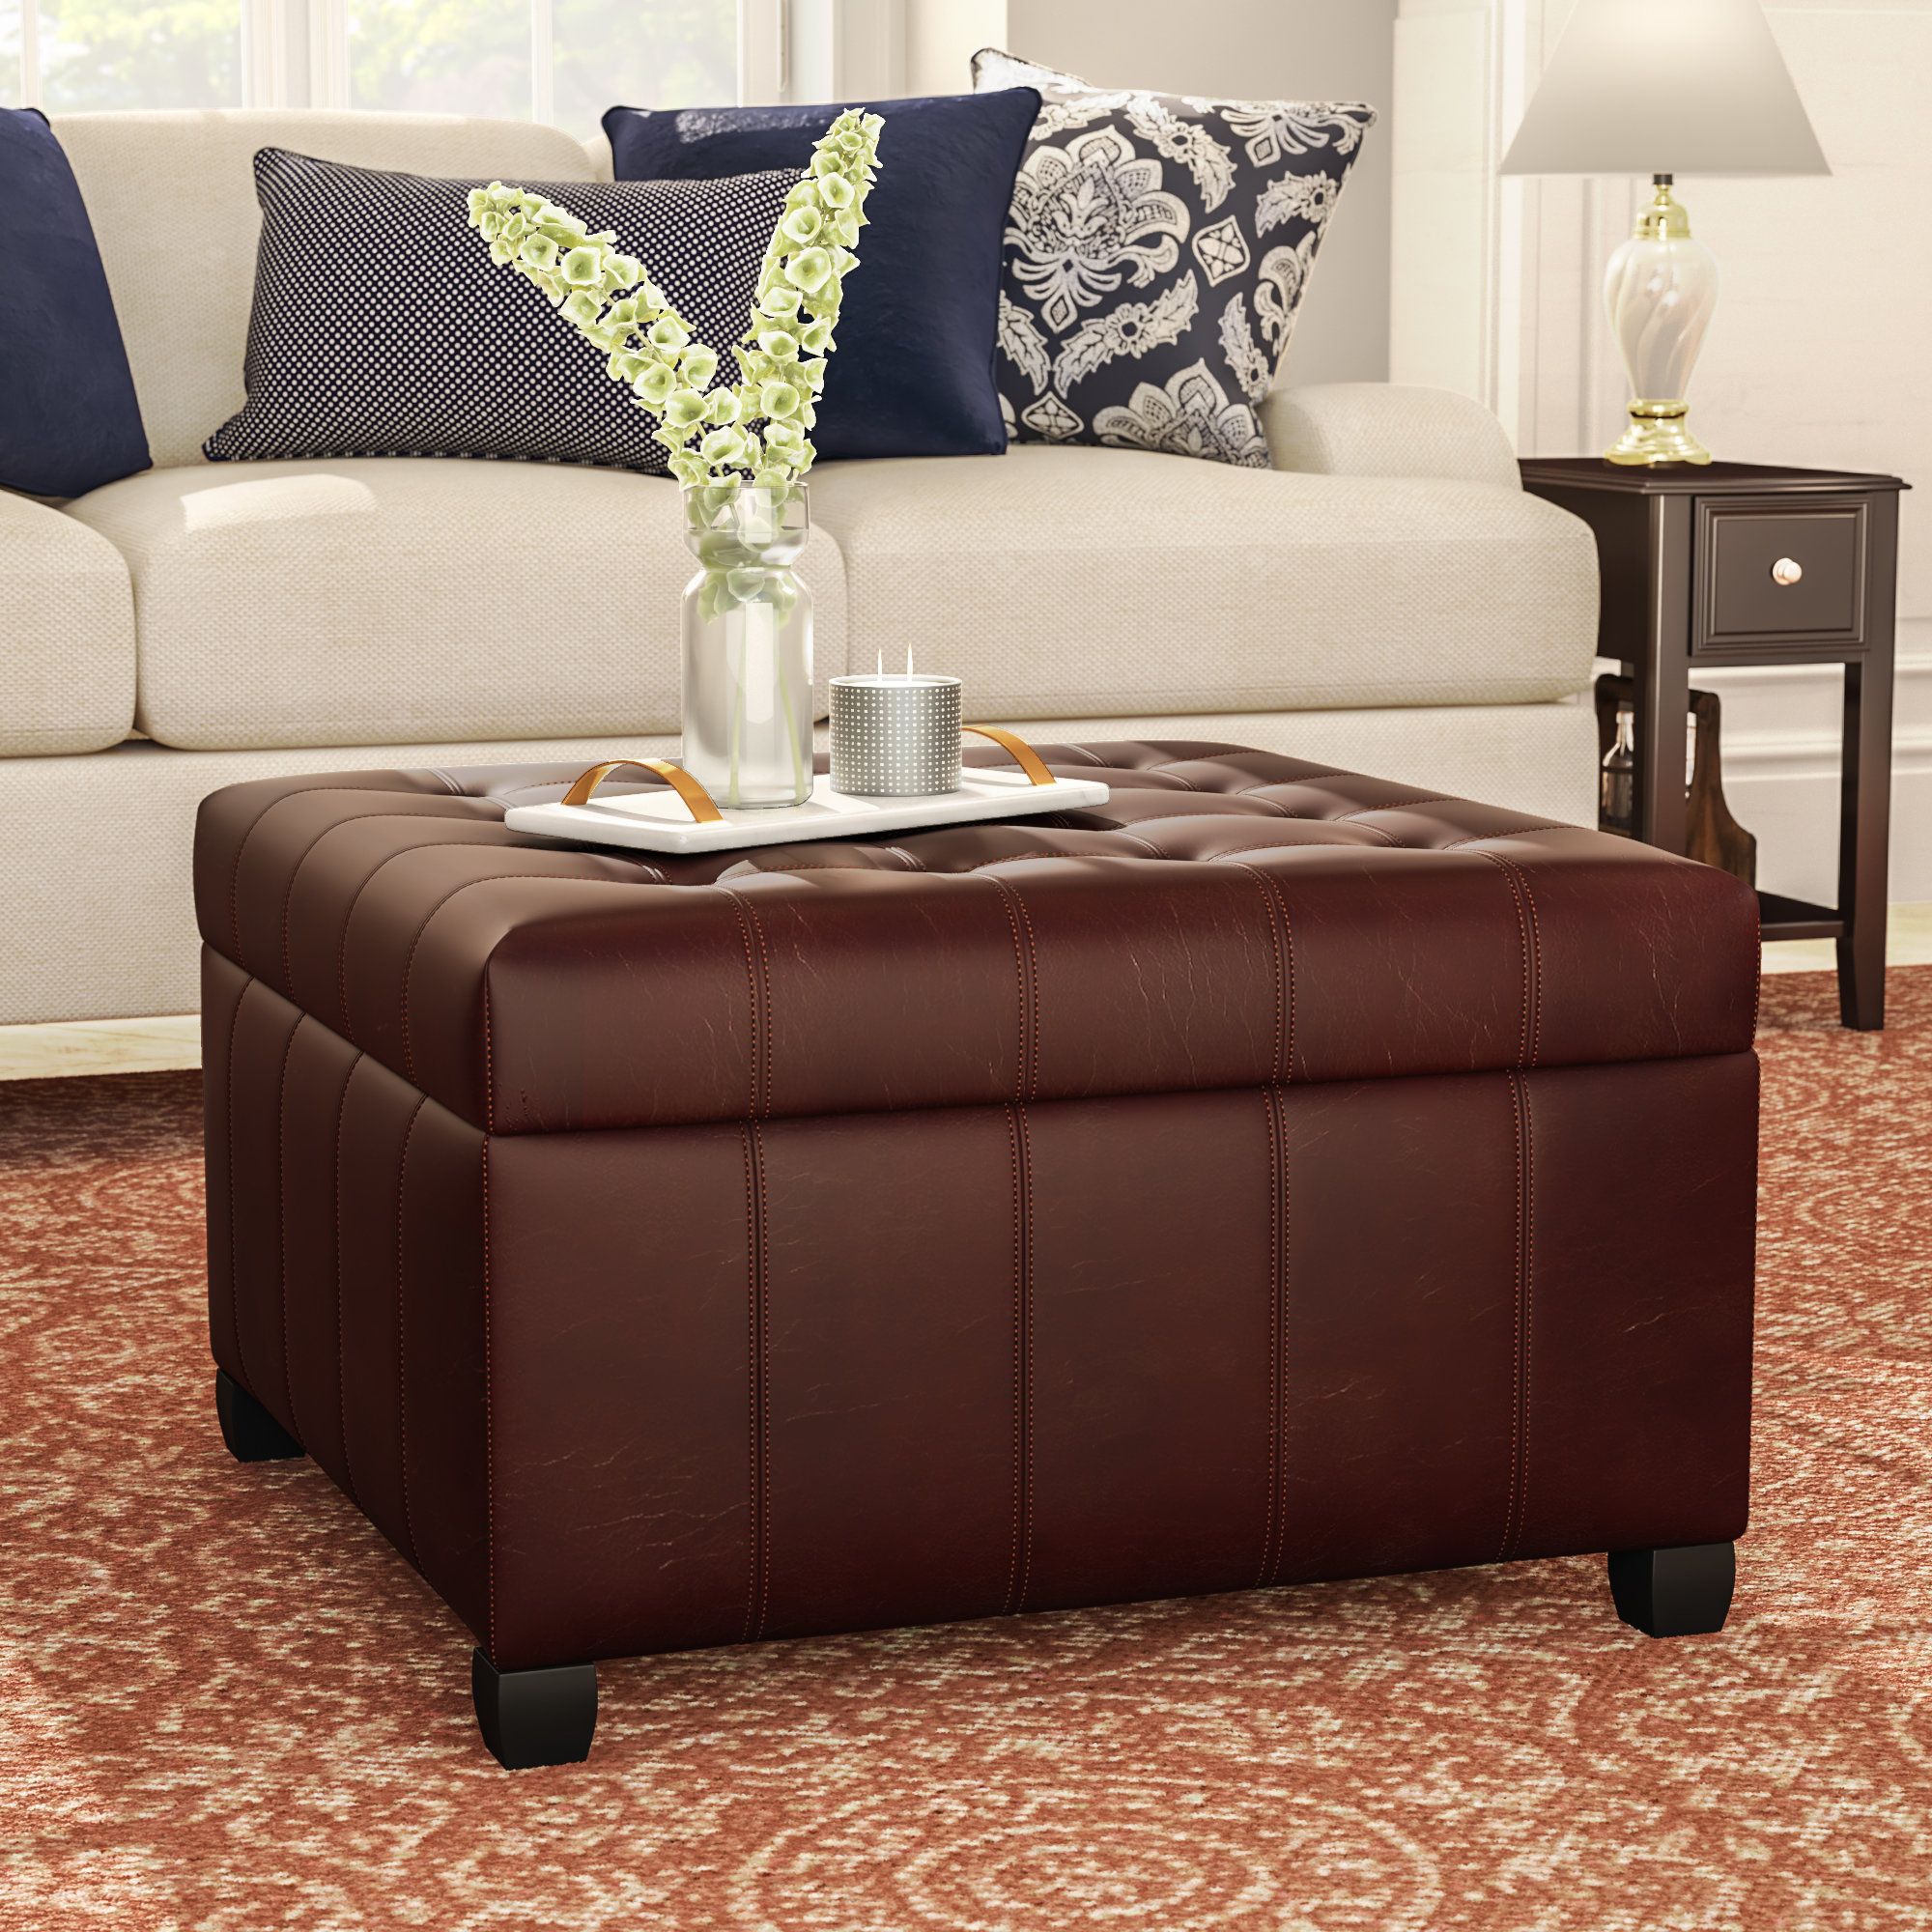 Most Current Espresso Leather And Tan Canvas Pouf Ottomans Within Leather Storage Ottoman Coffee Table • Display Cabinet (View 2 of 10)